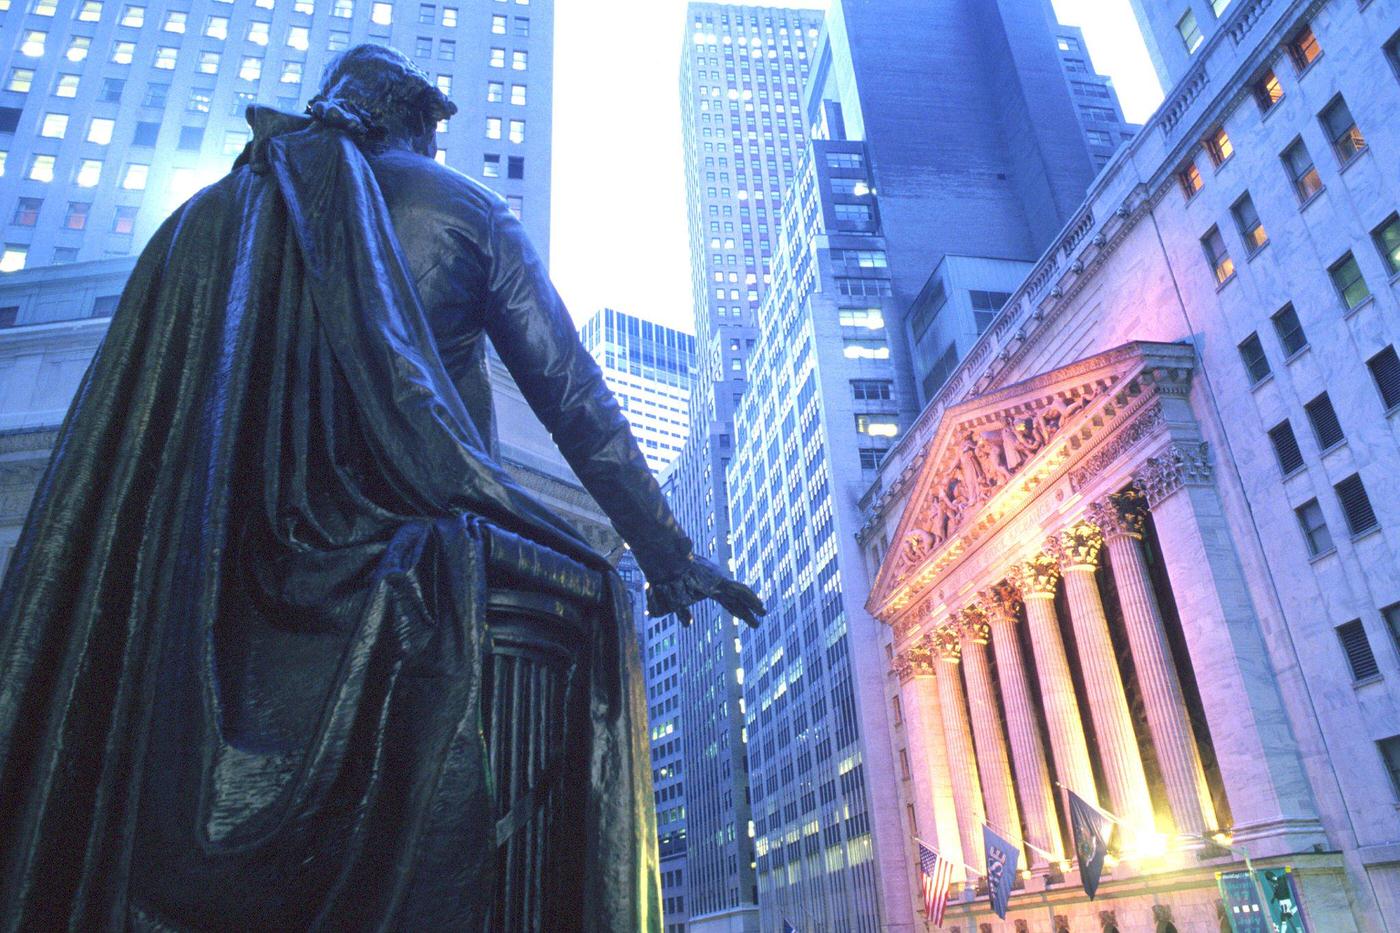 New York Stock Exchange With Statue In Foreground, Manhattan